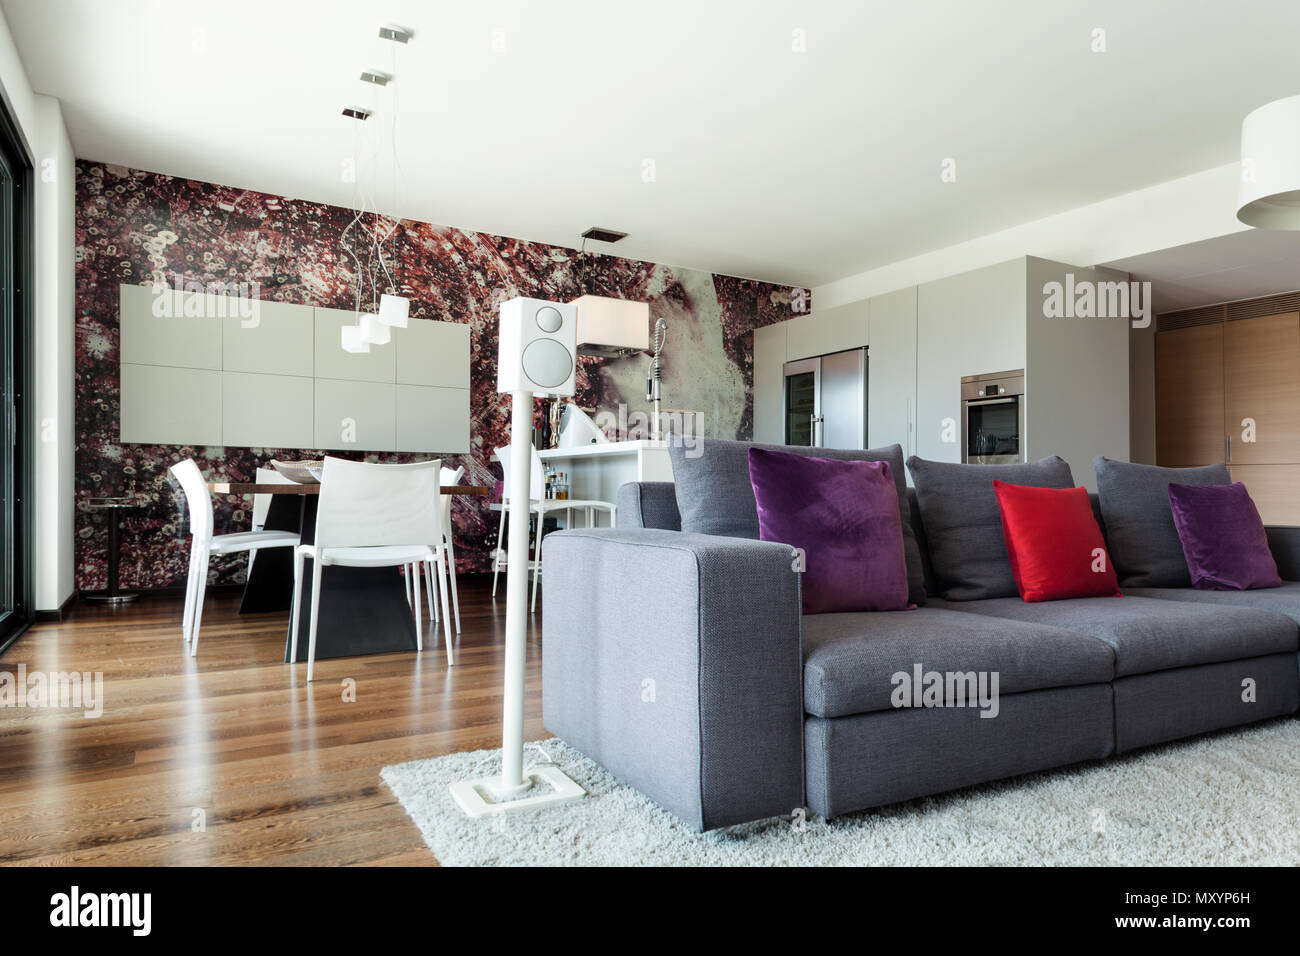 Interior of modern house, comfortable living room furnished Stock Photo